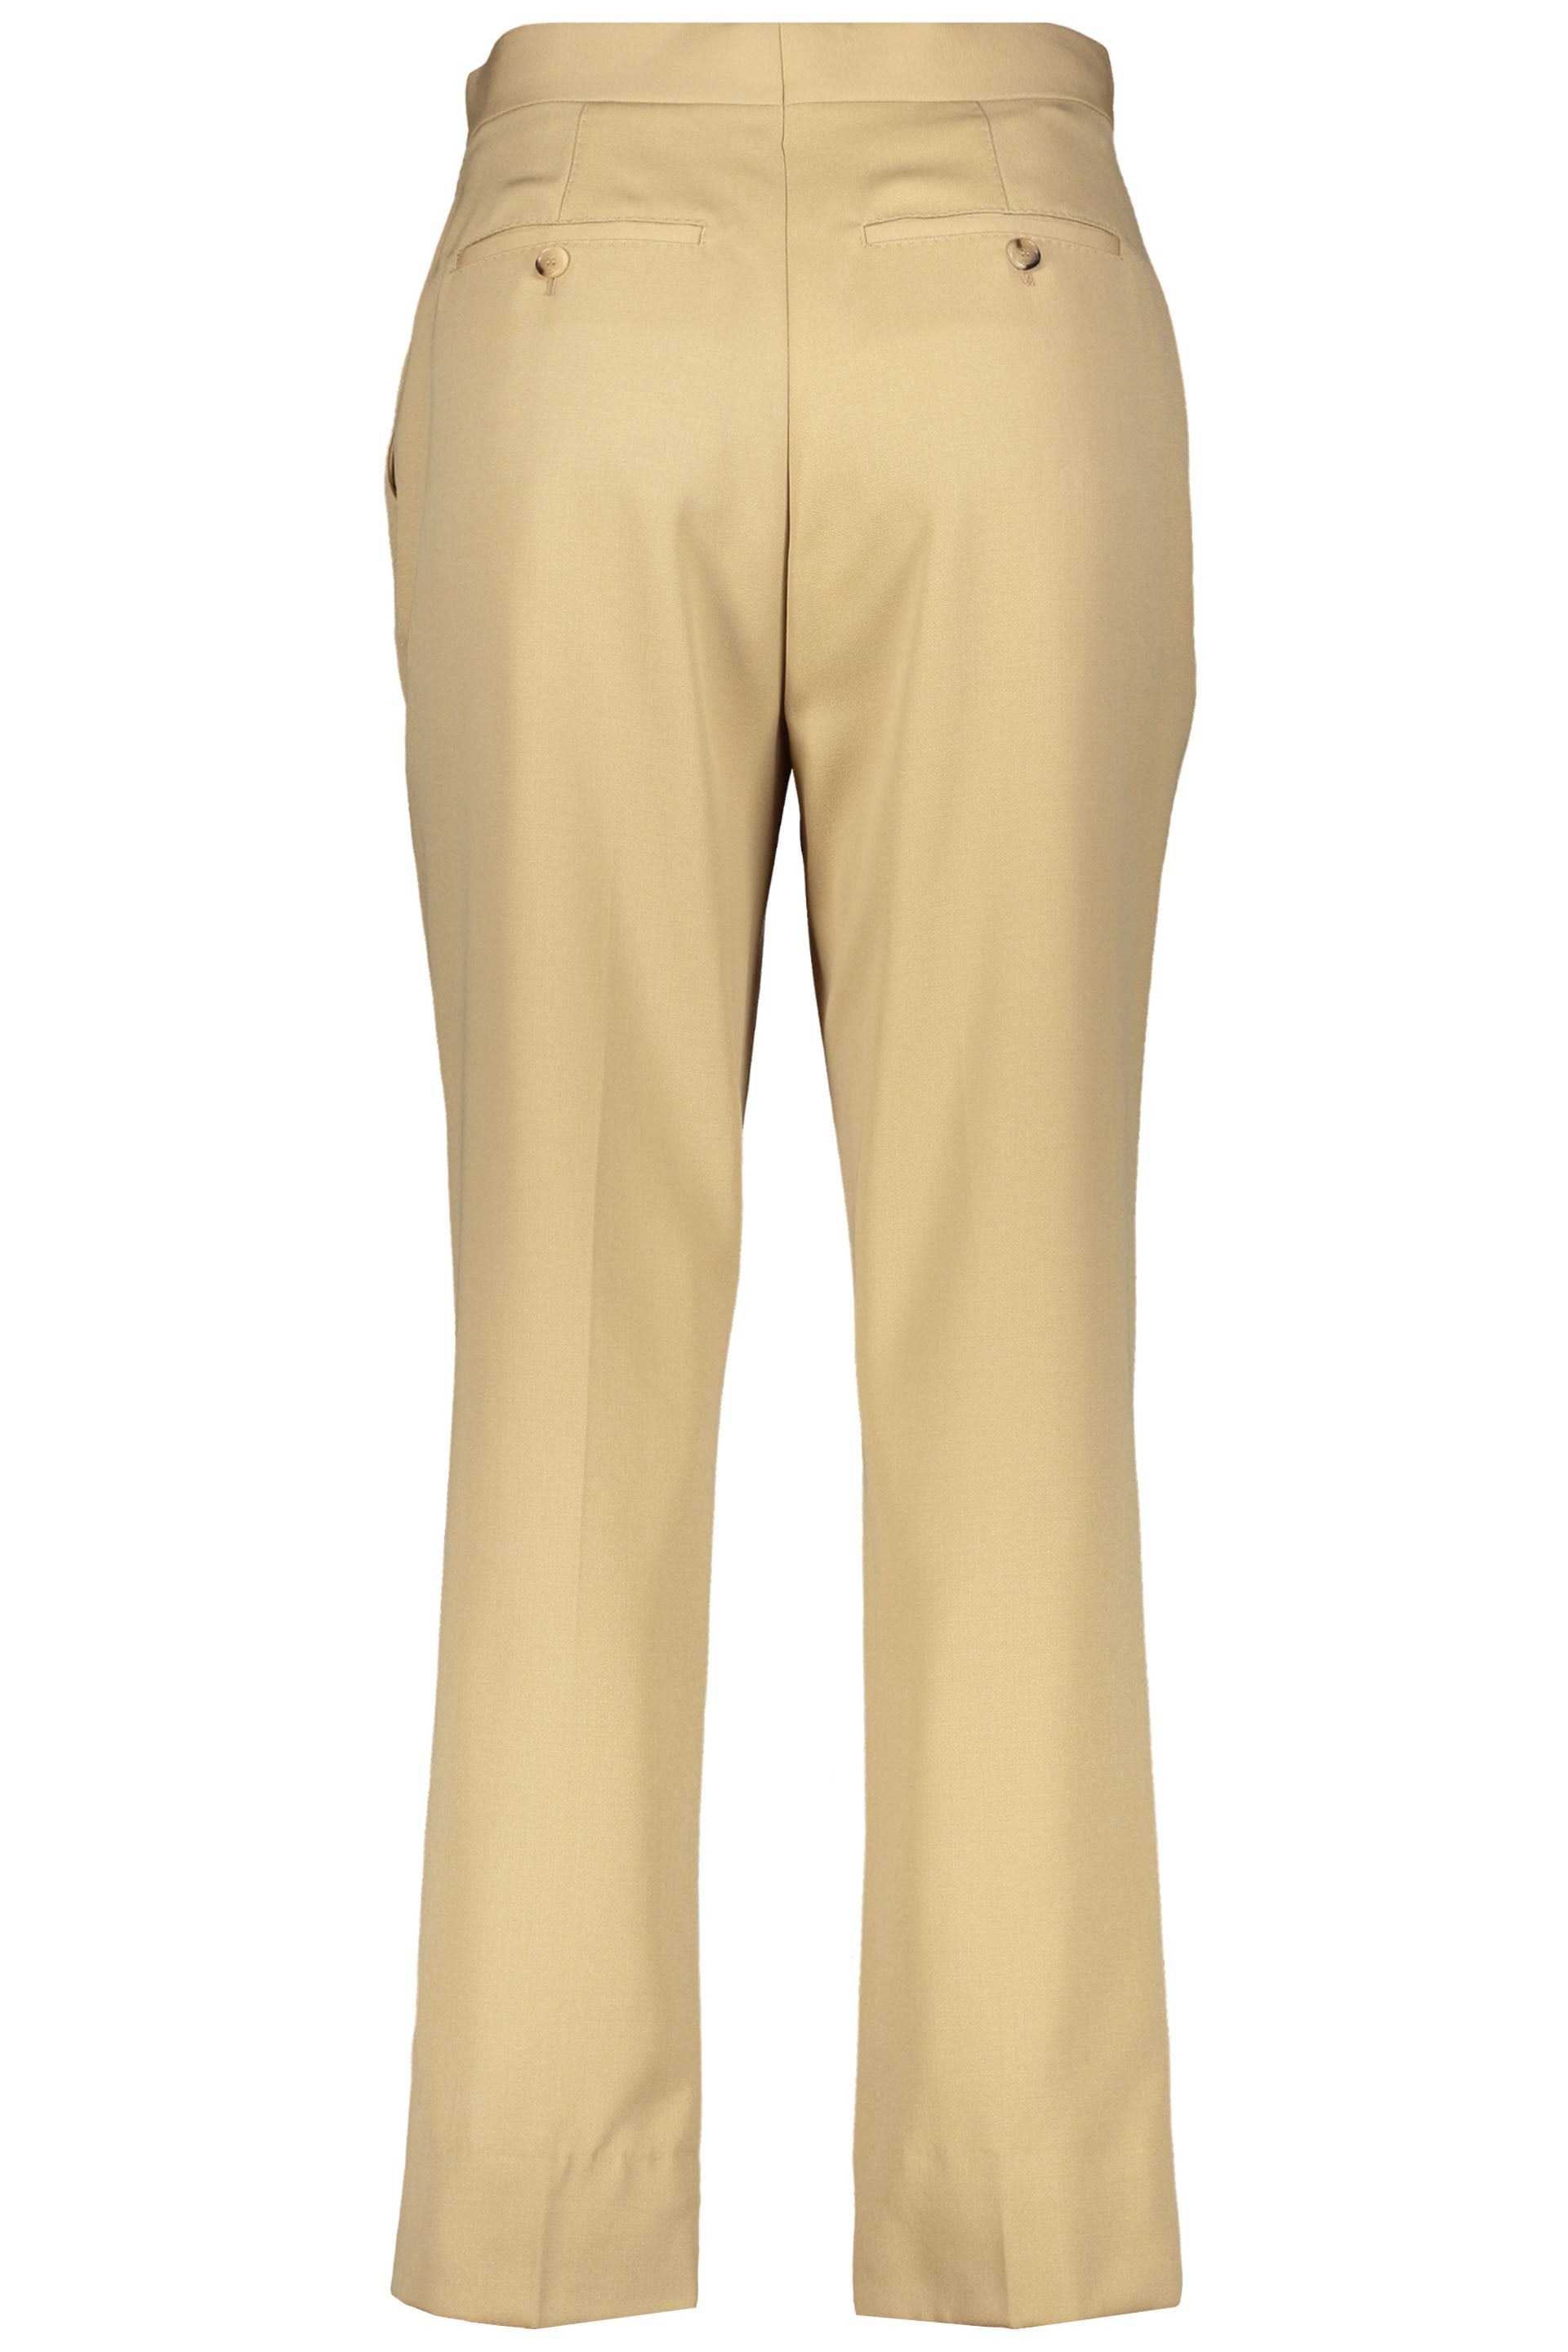 Wool trousers-Burberry-OUTLET-SALE-ARCHIVIST